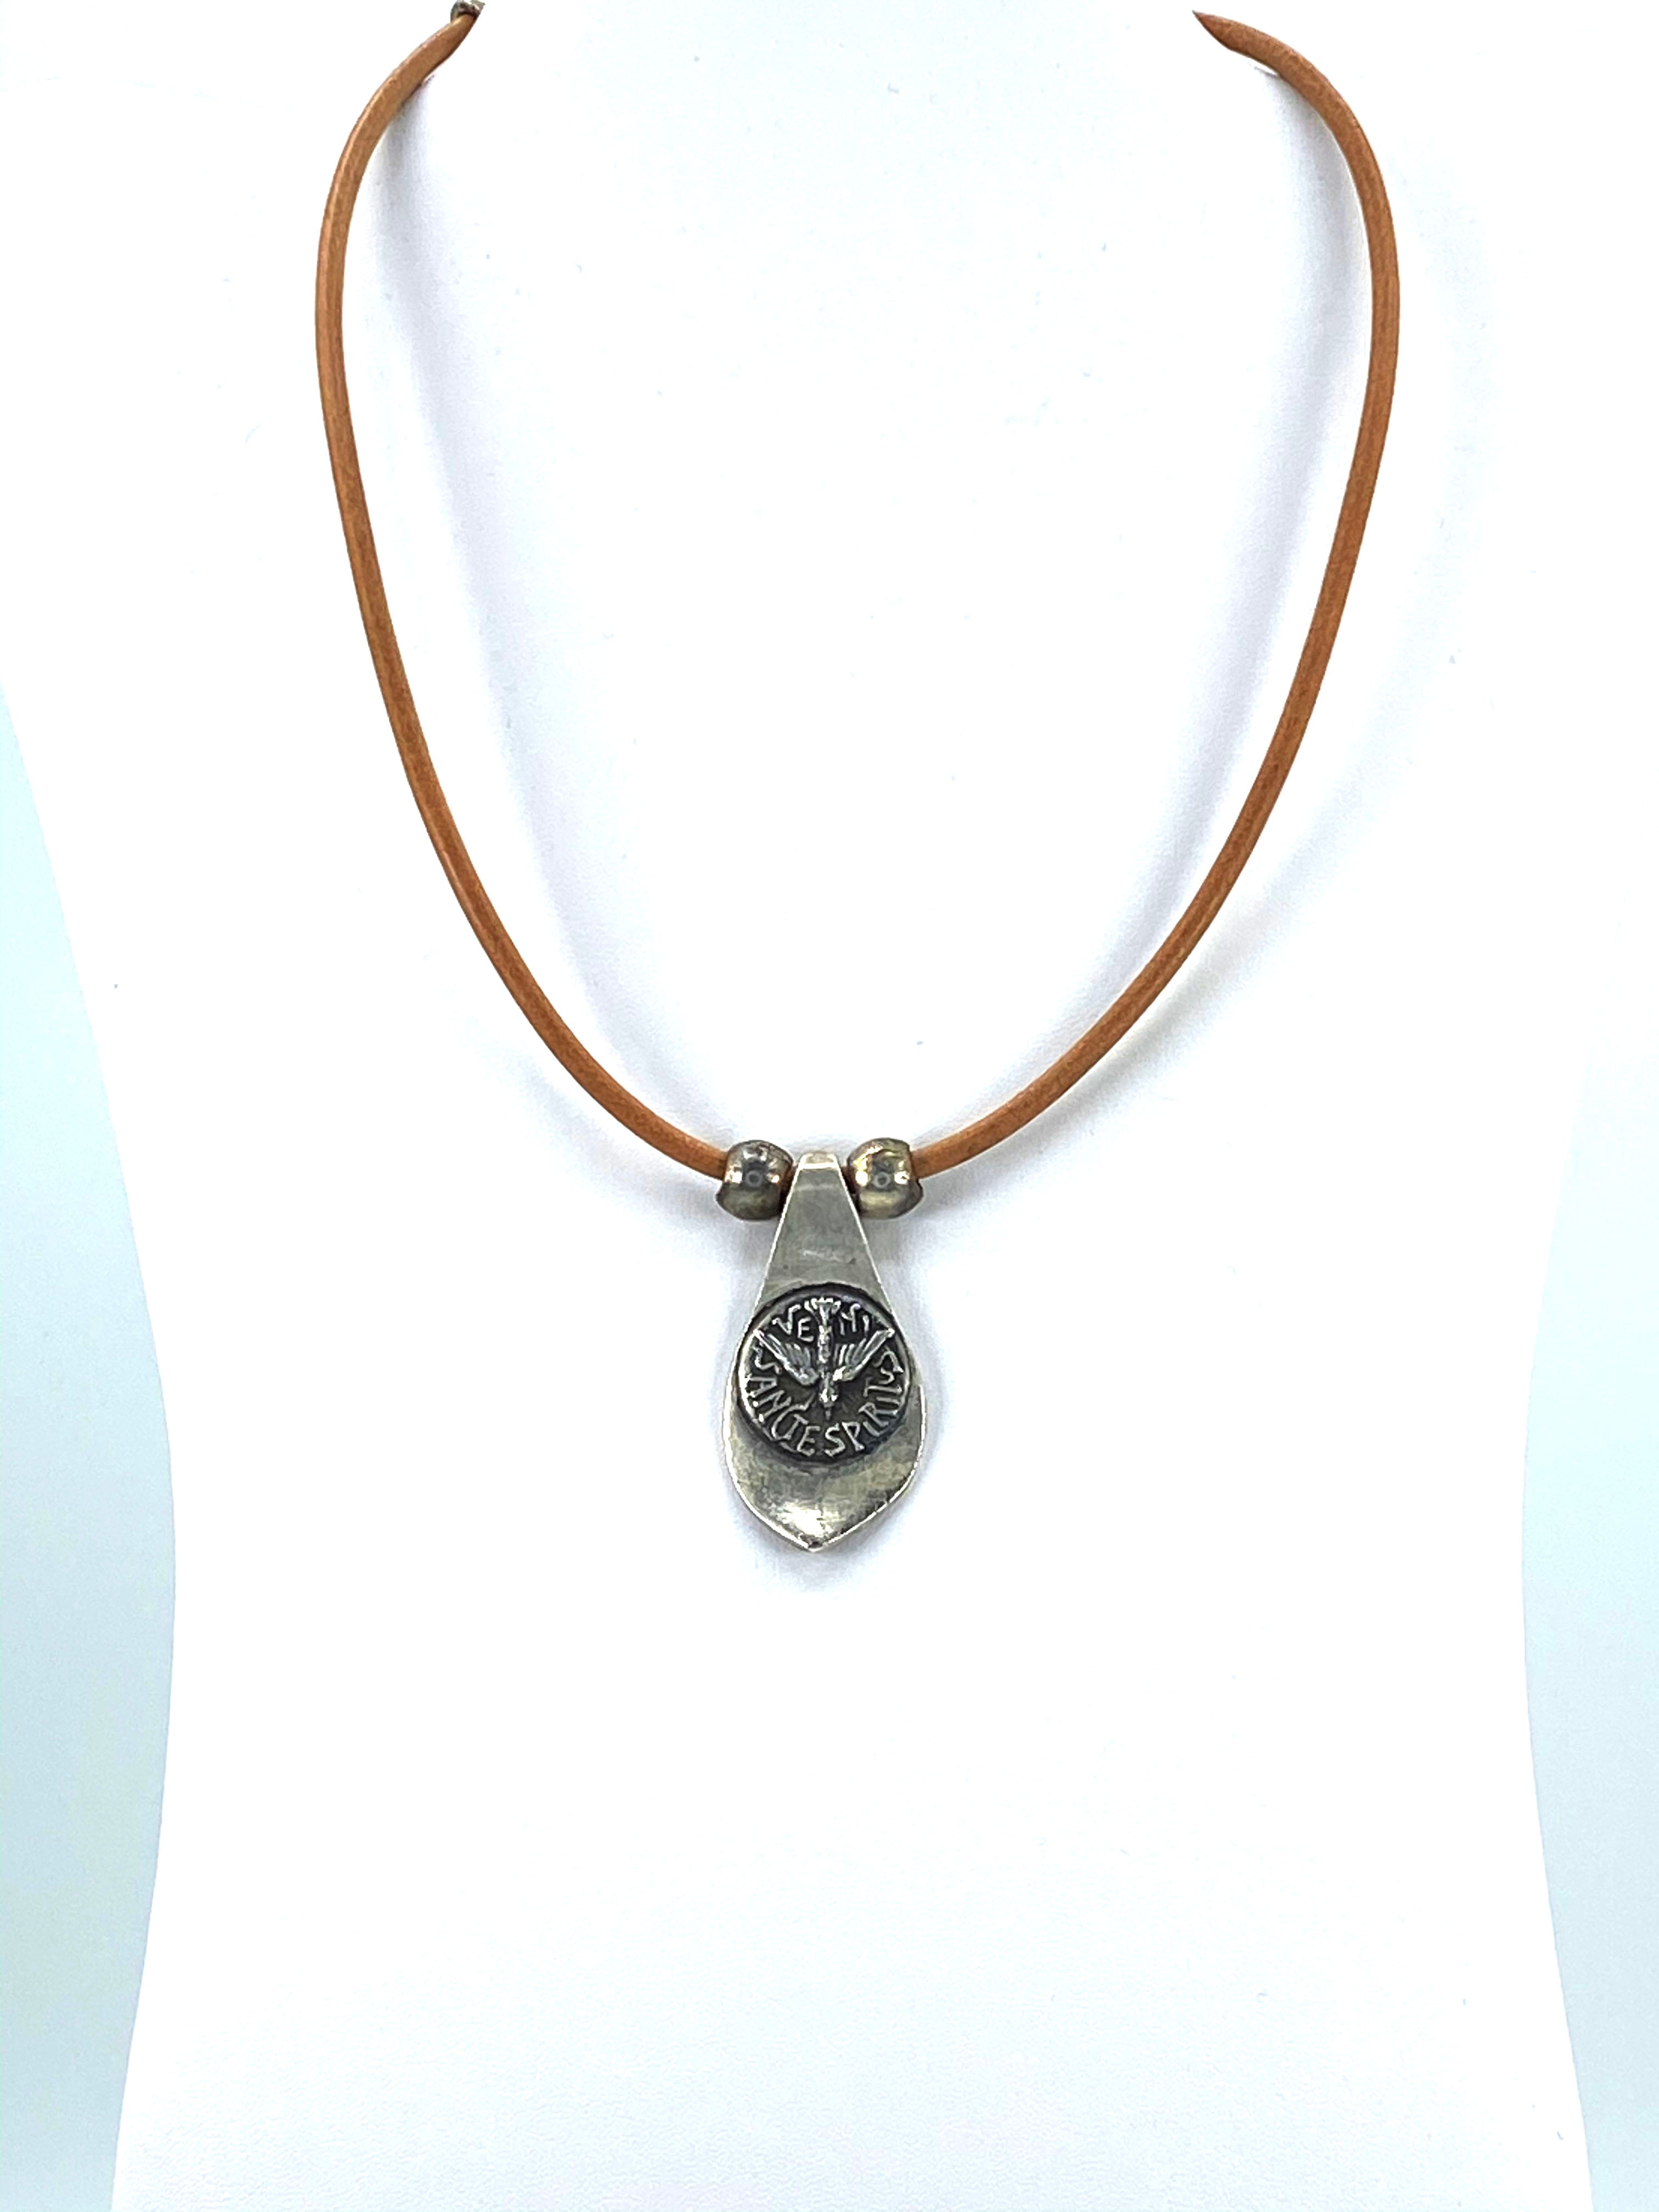 Vintage Necklace of The Holy Spirit Handmade Jewelry with Genuine Leather Strap by Graciela's Collection